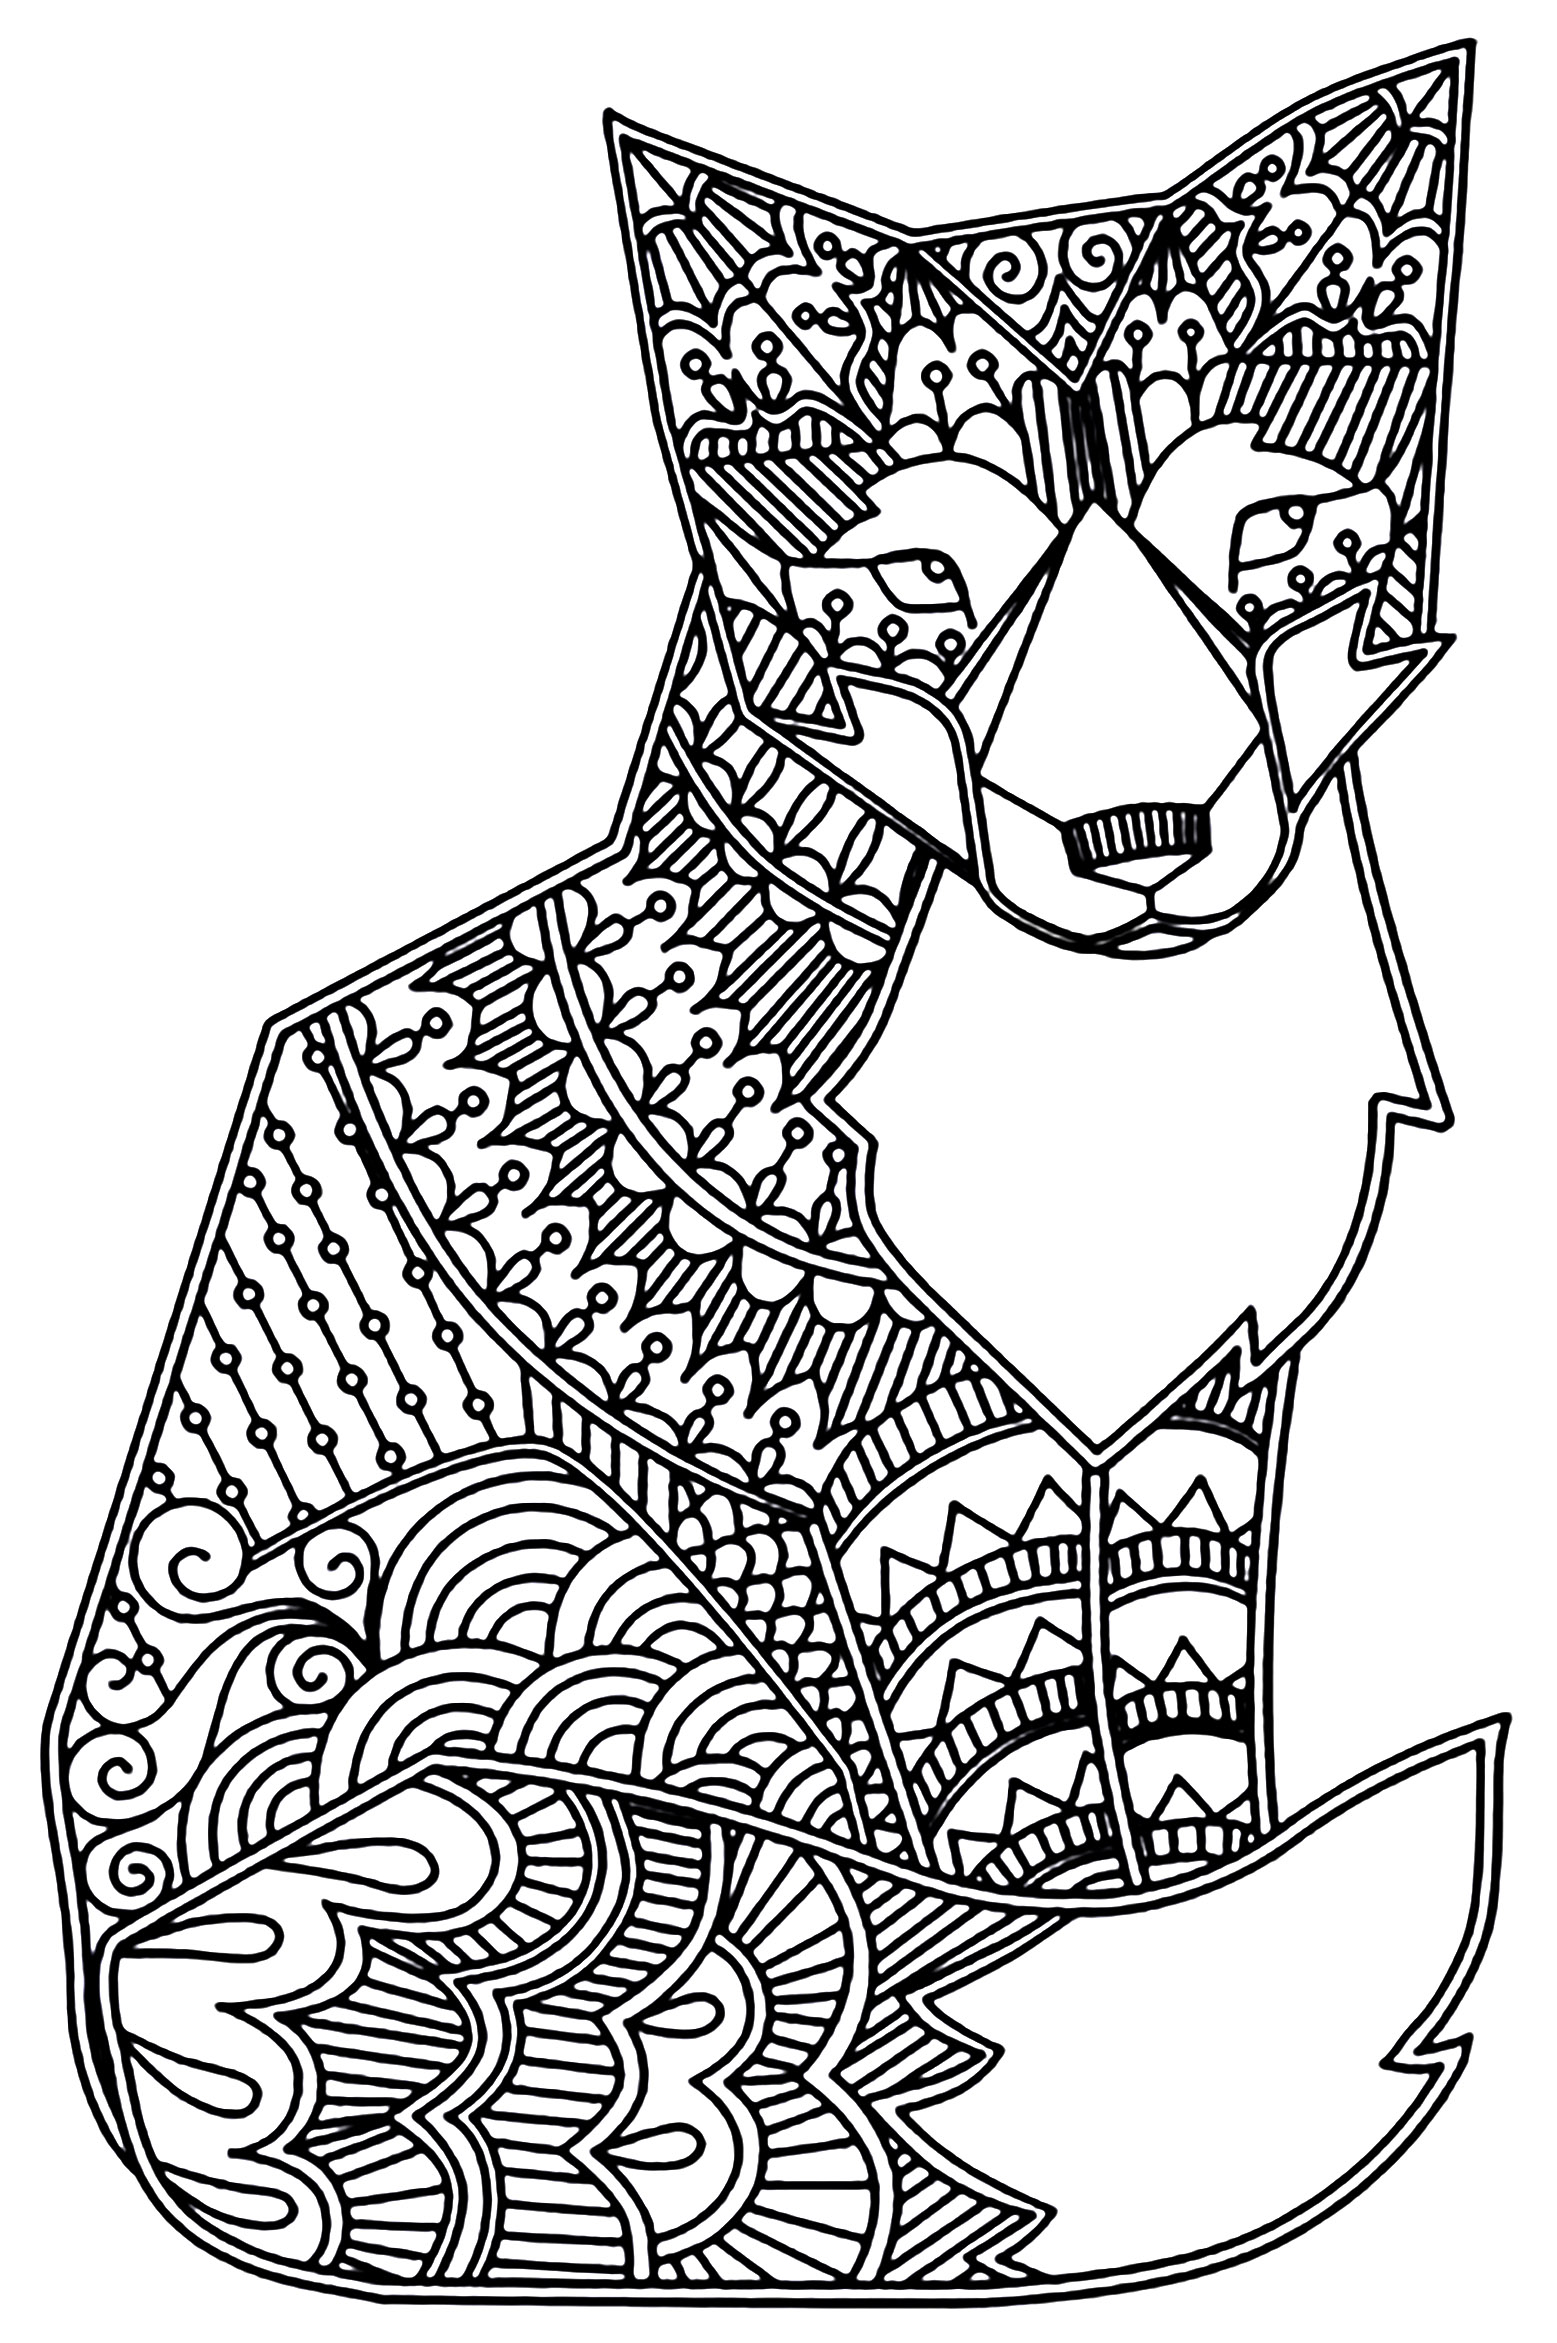 Download Fox - Foxes Adult Coloring Pages